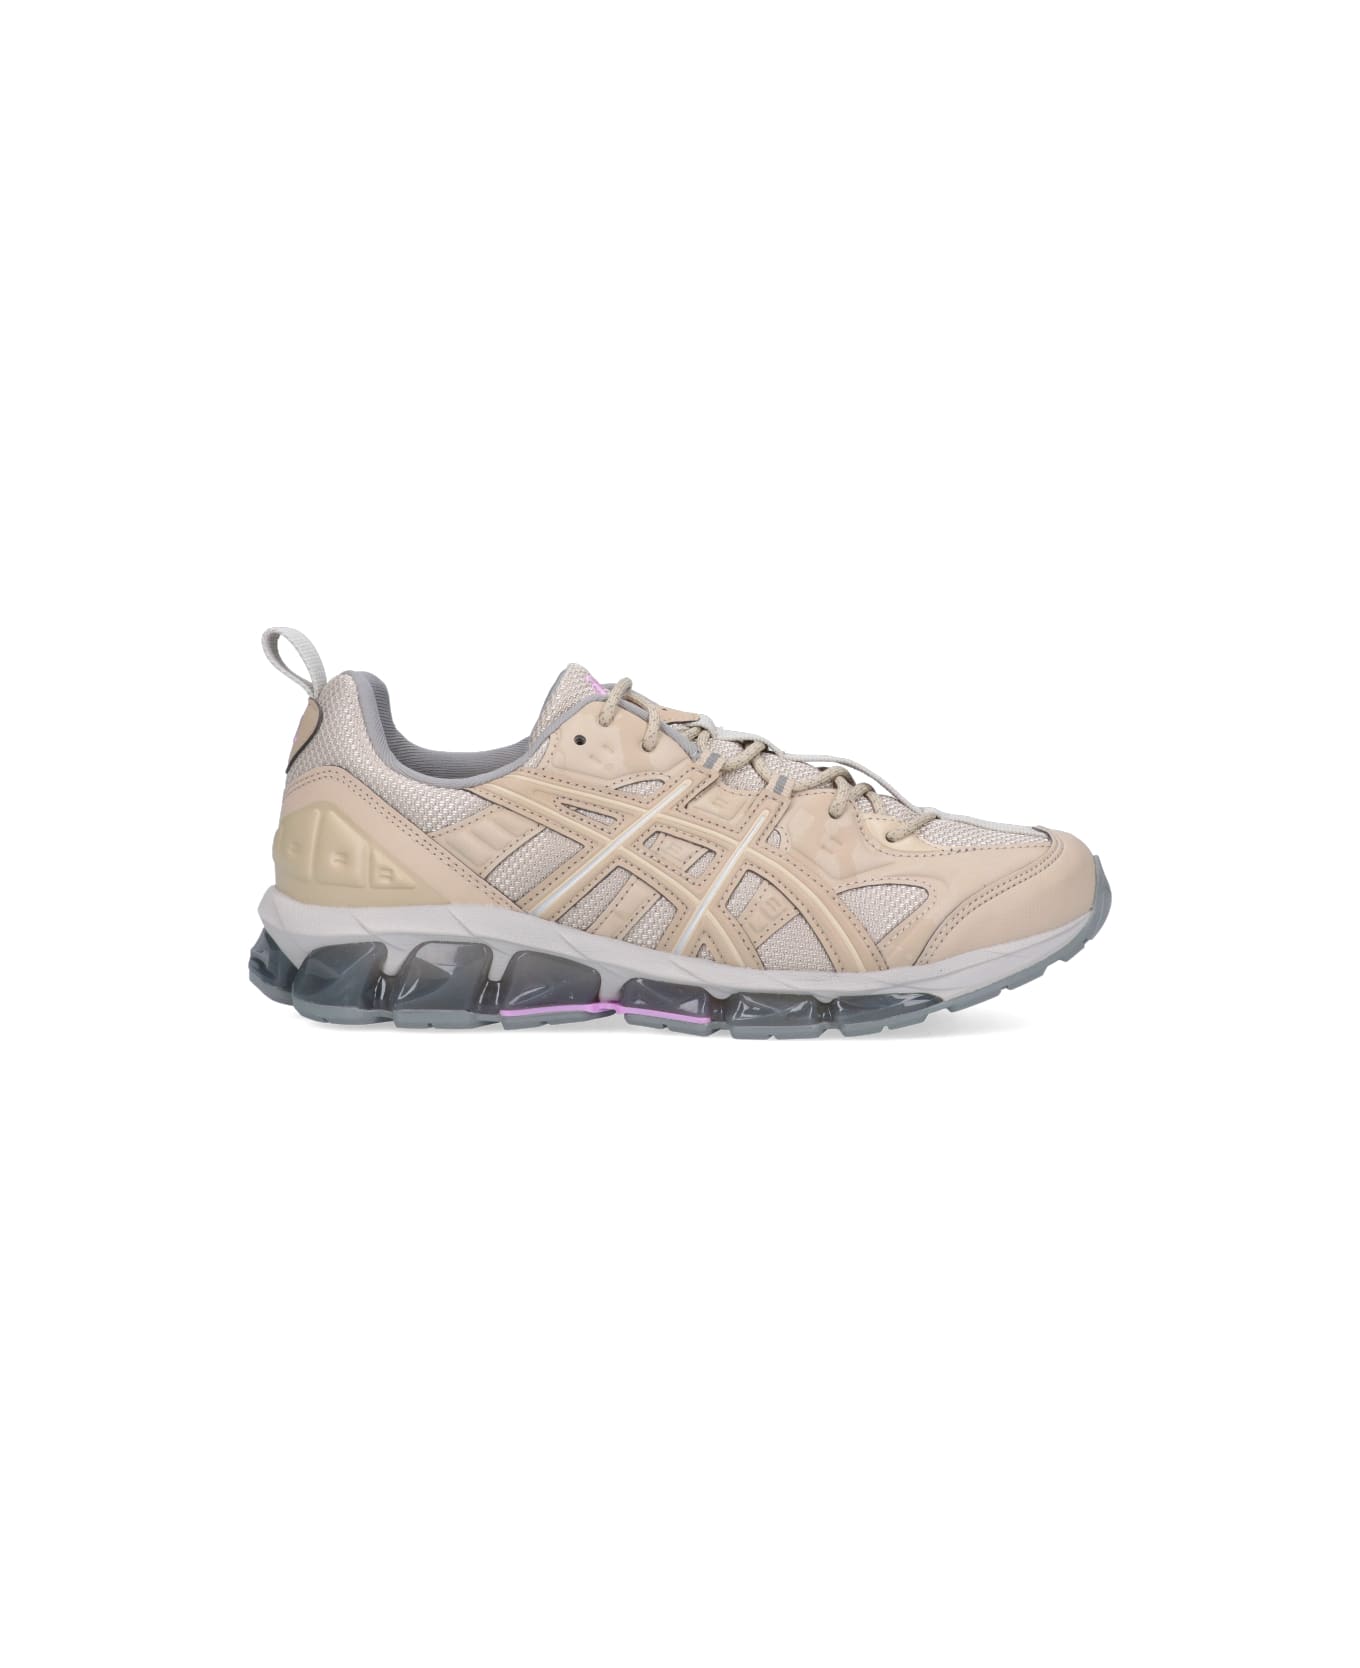 Asics Sneakers - Feather Grey/wood Crepe